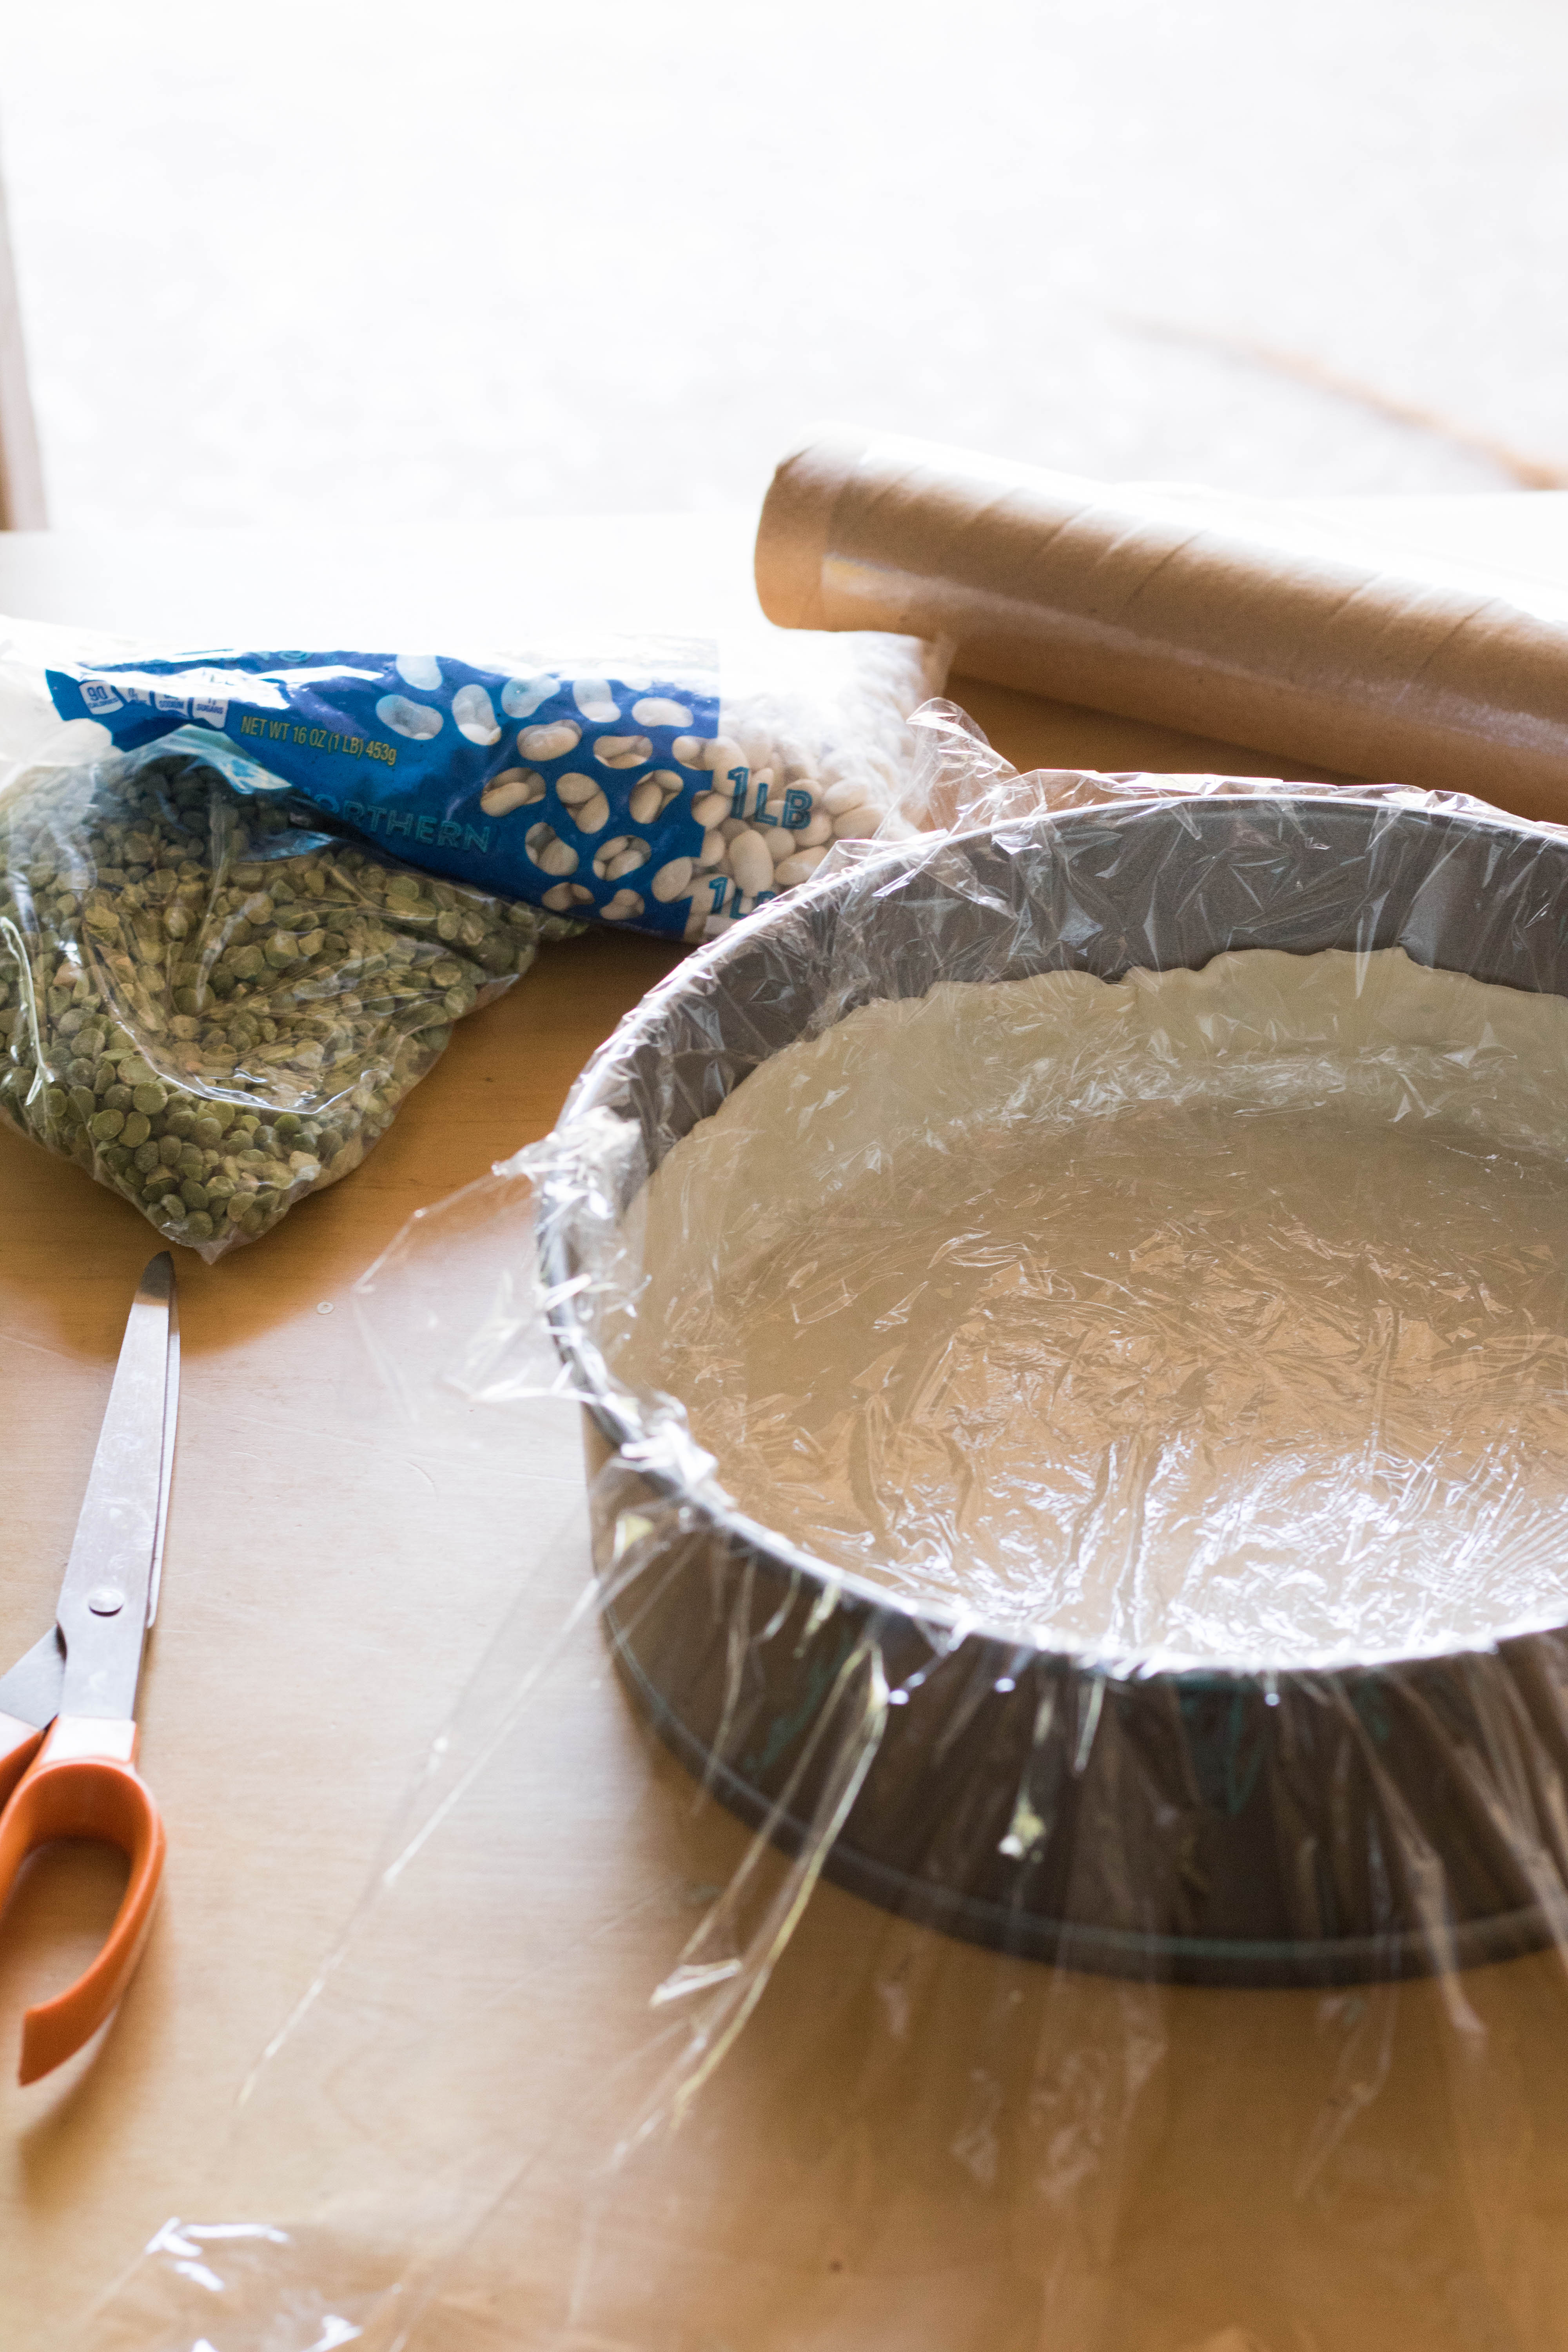 lining the pie crust before baking